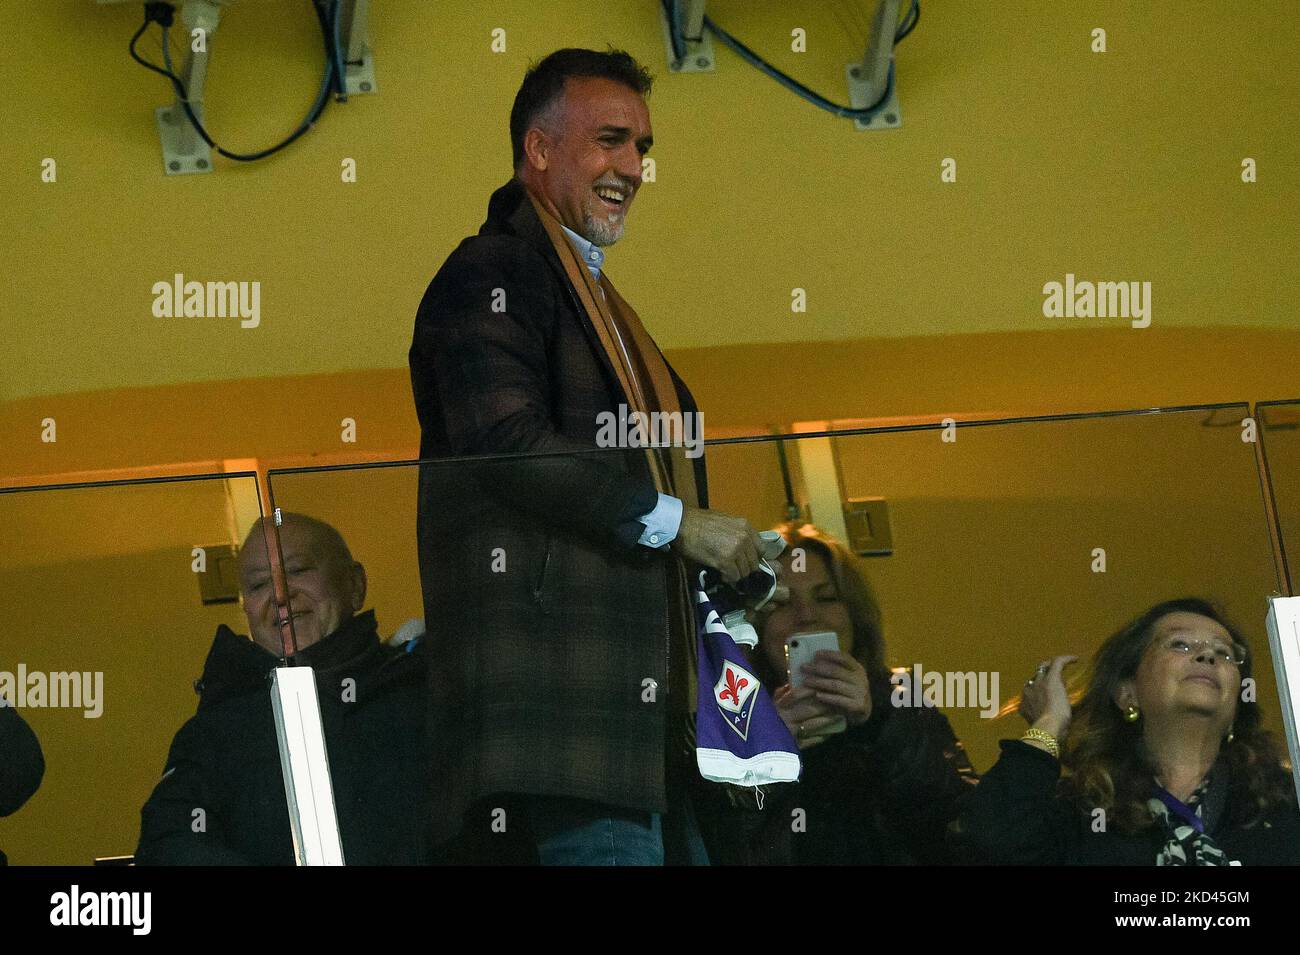 Former ACF Fiorentina player Gabriel Omar Batistuta on the stands during the Coppa Italia Semi Final 1st Leg match between ACF Fiorentina and FC Juventus at Stadio Artemio Franchi, Florence, Italy on 2 March 2022. (Photo by Giuseppe Maffia/NurPhoto) Stock Photo